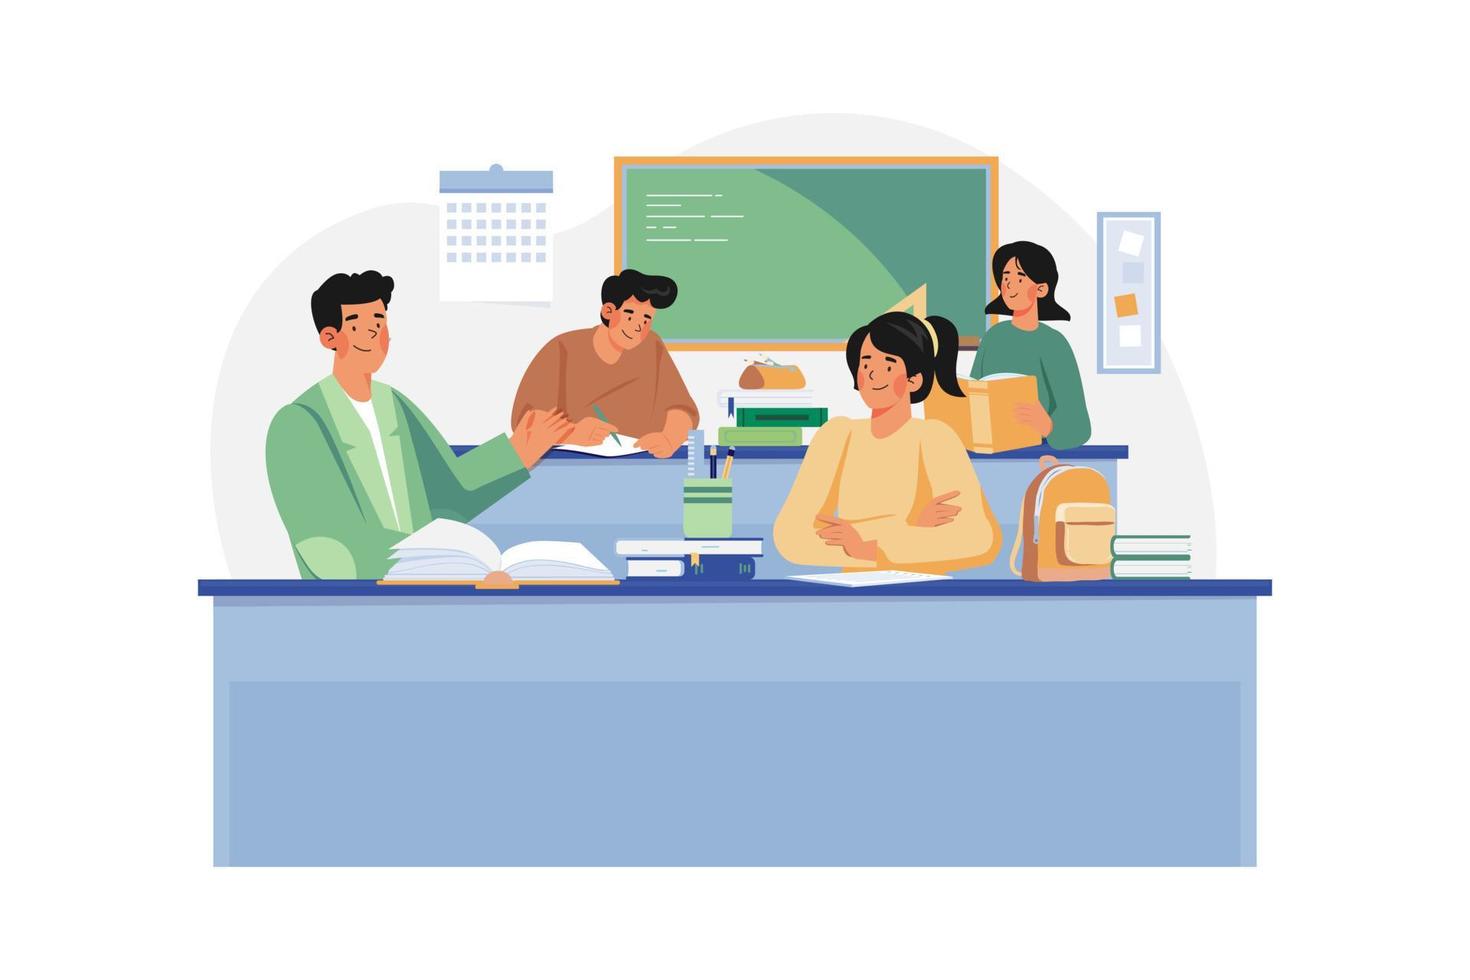 Students In The Classroom Illustration concept on white background vector